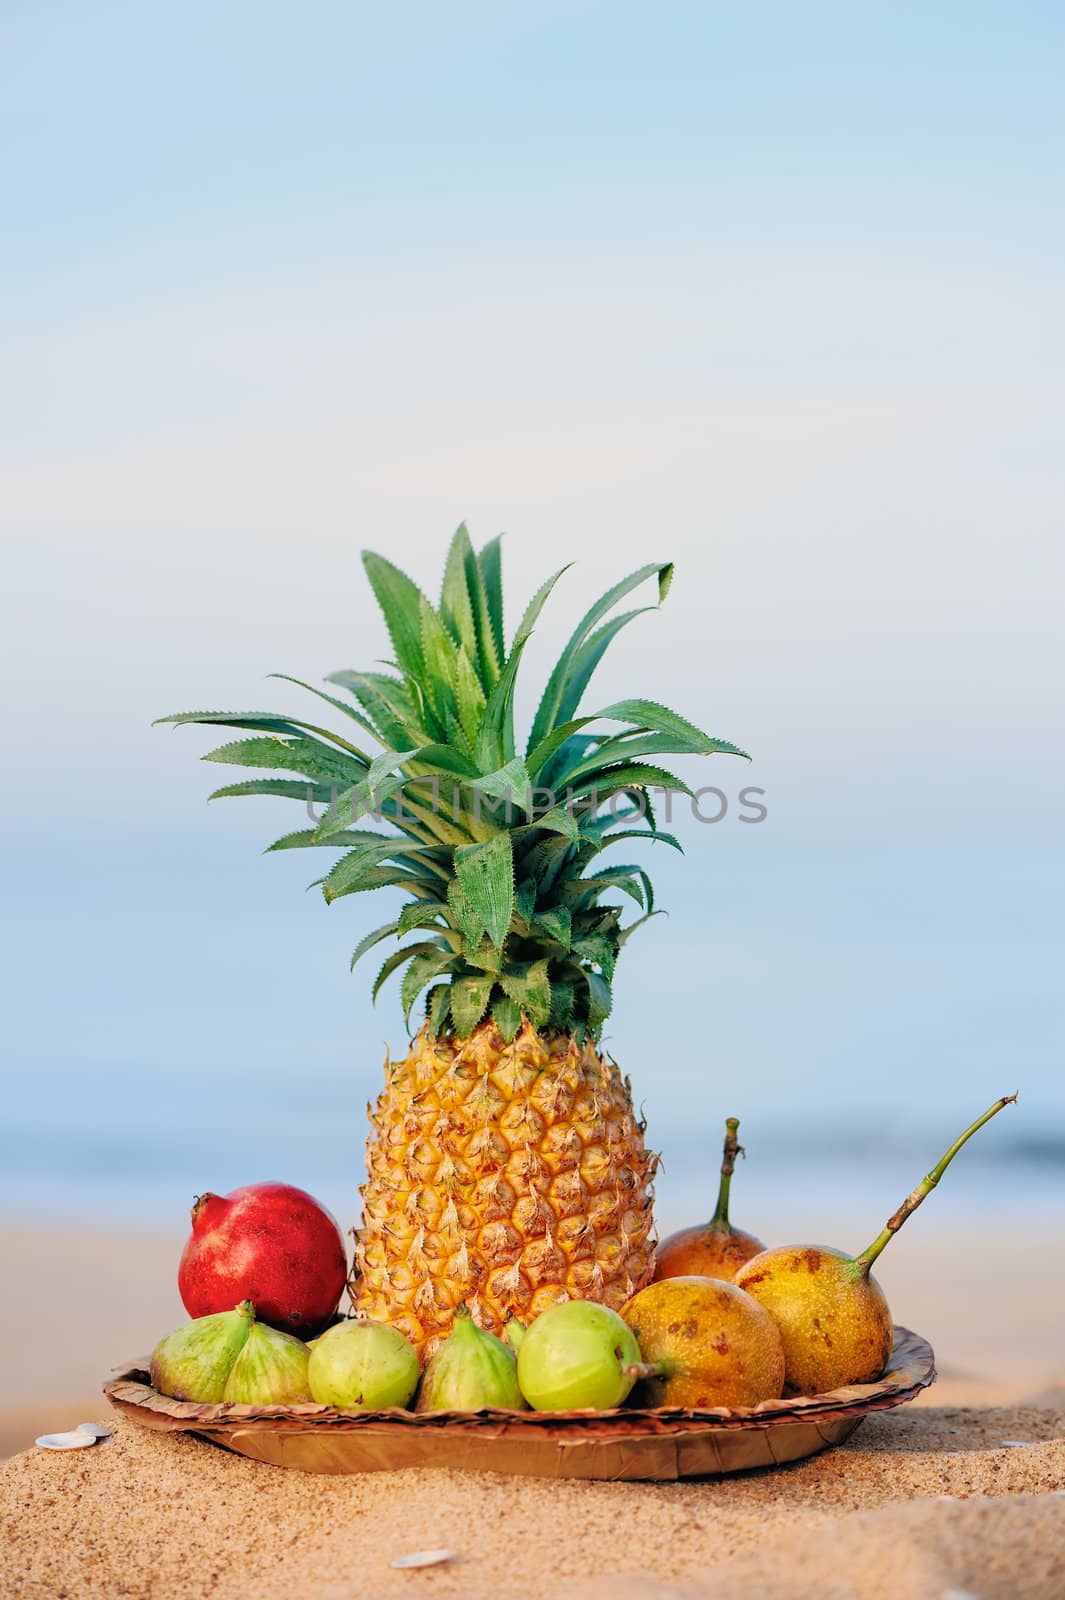 Pineapple and tropical fruit on the beach